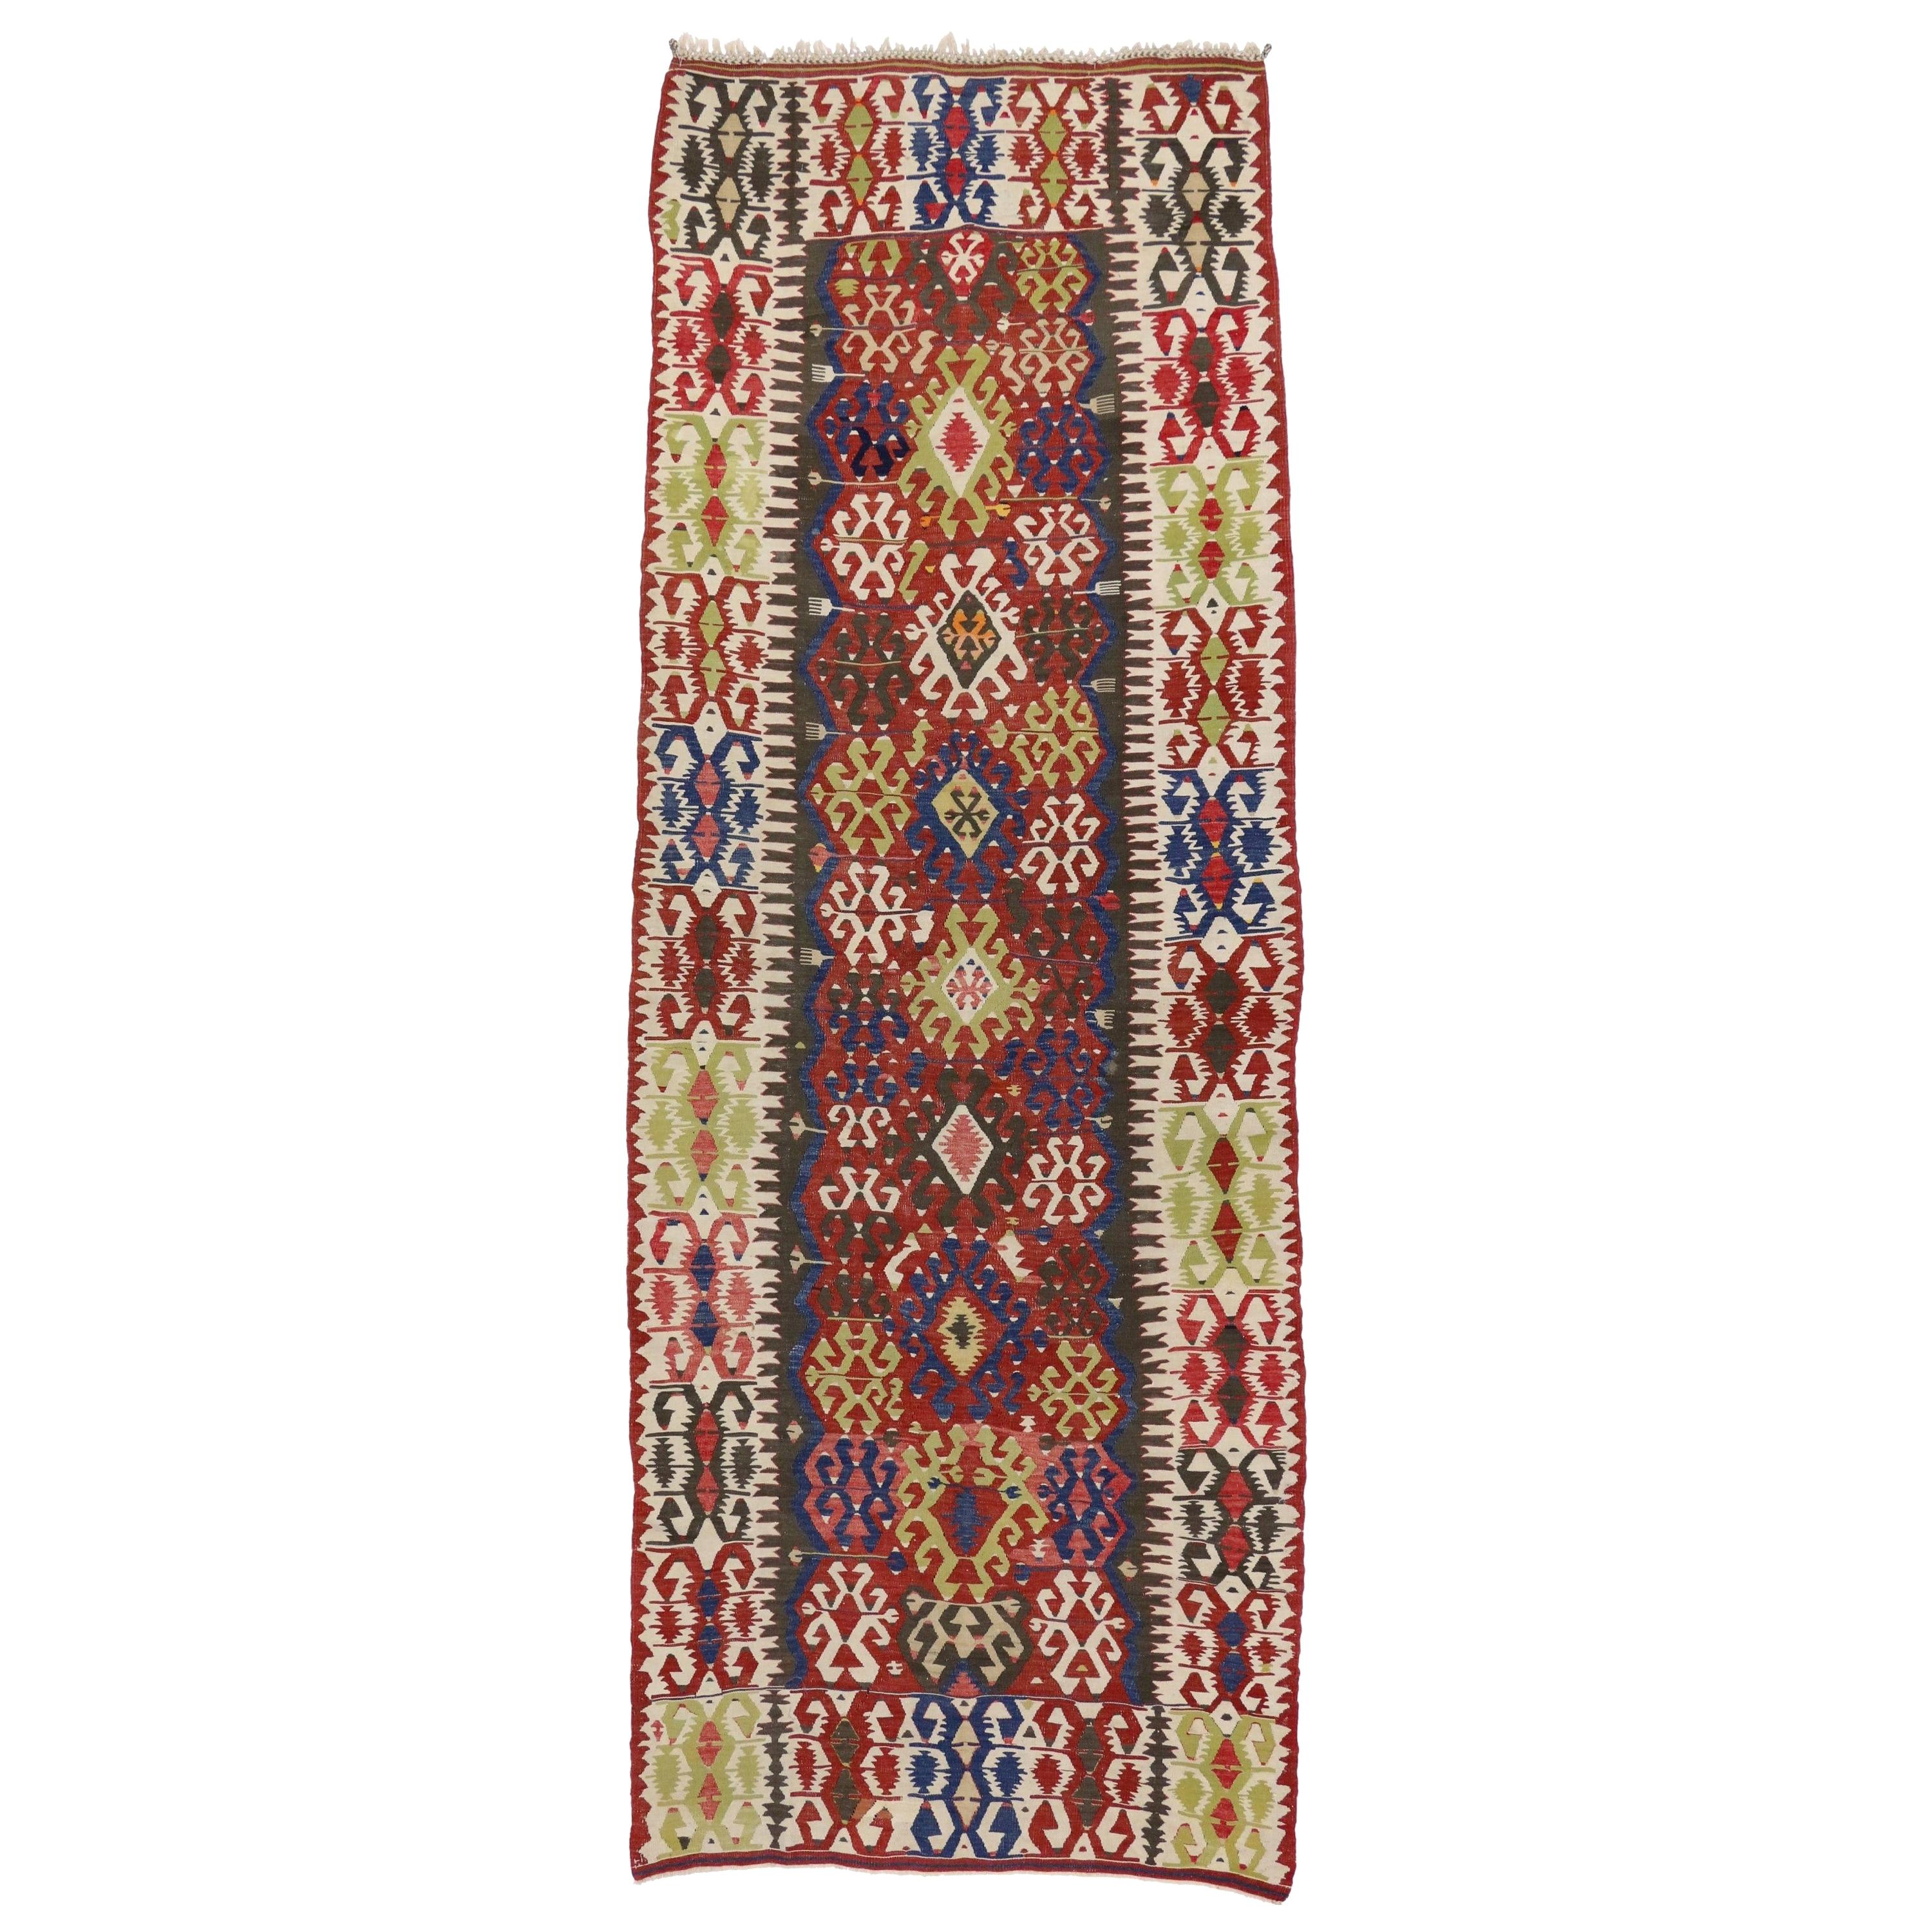 Antique Caucasian Kilim Runner with Tribal Style